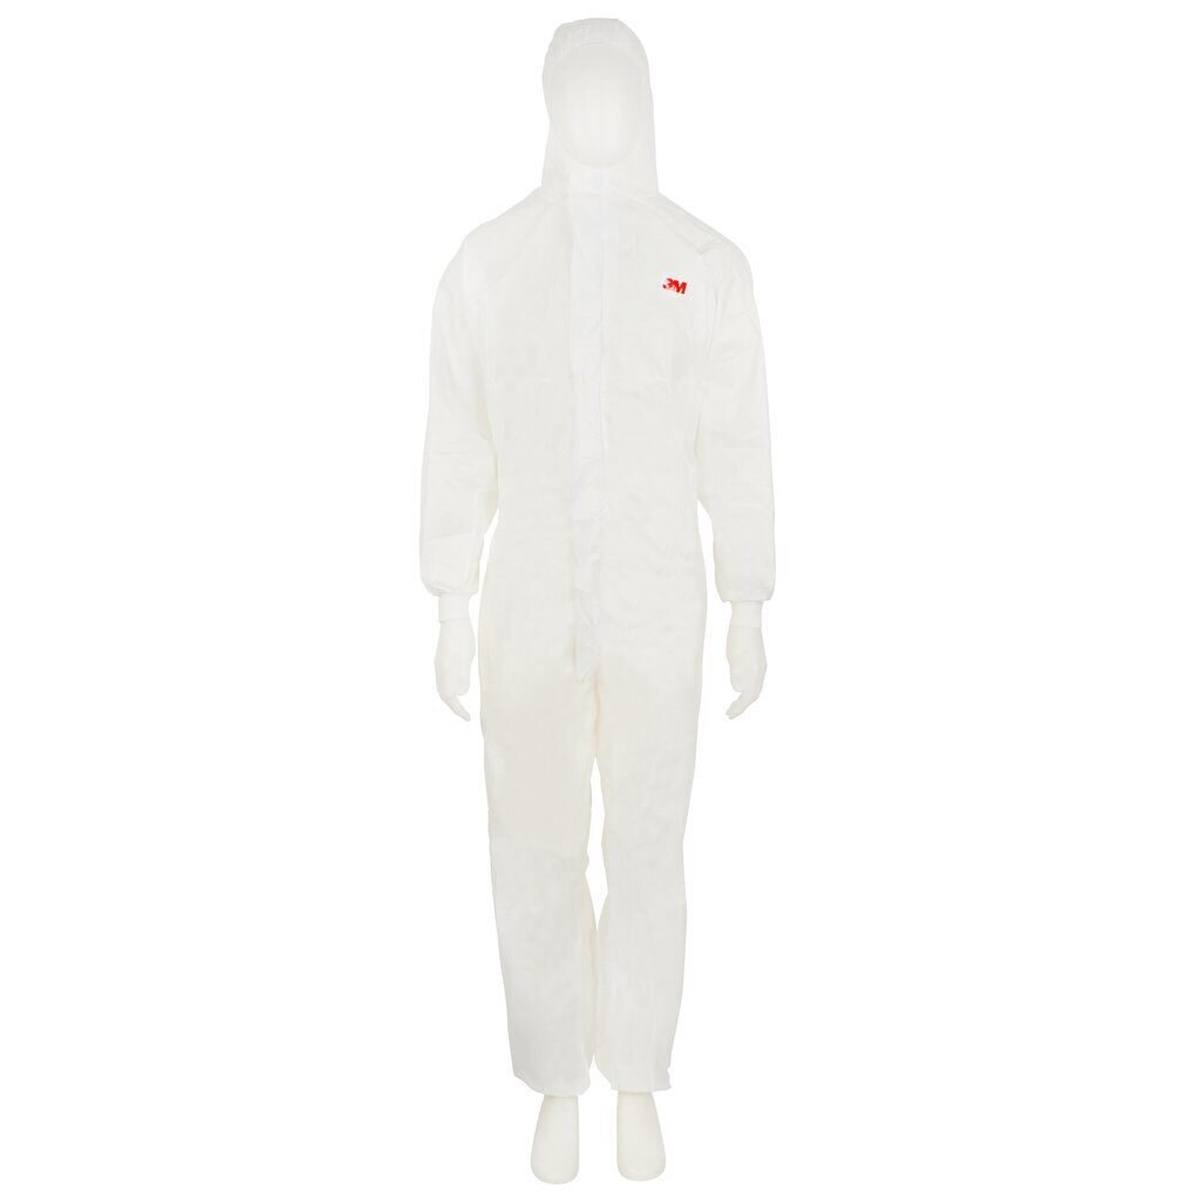 3M 4520 coverall, white+green, type 5/6, size XL, material SMMS low-linting, breathable, antistatic, knitted cuffs